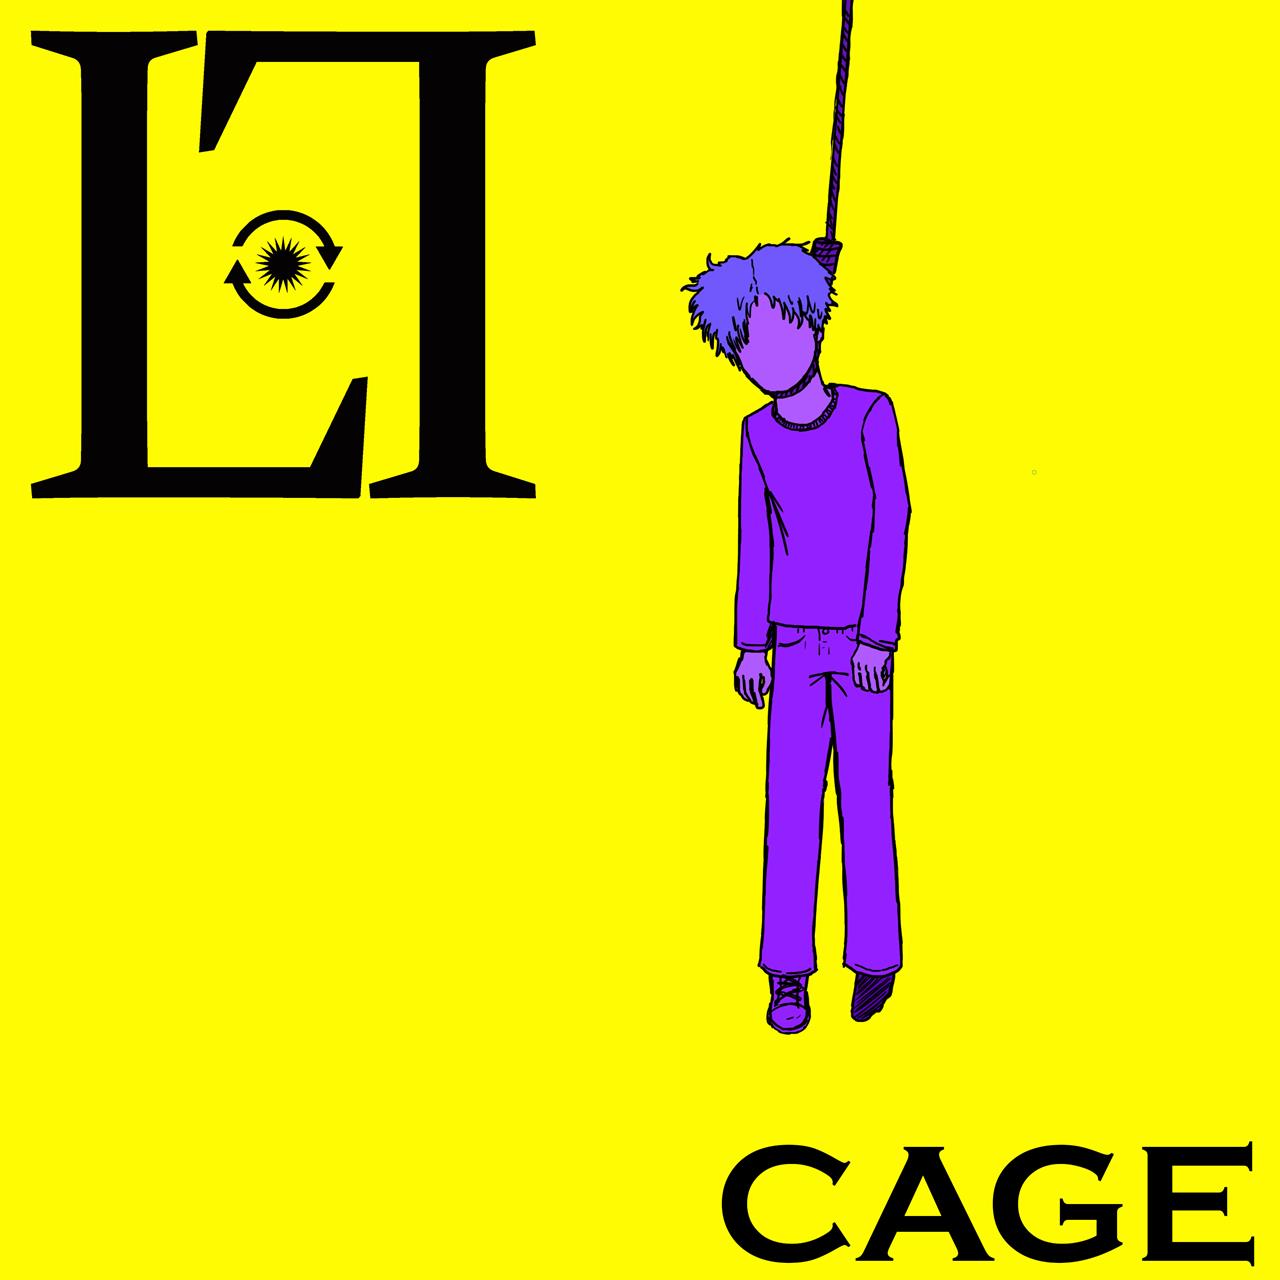 Cage - cover art